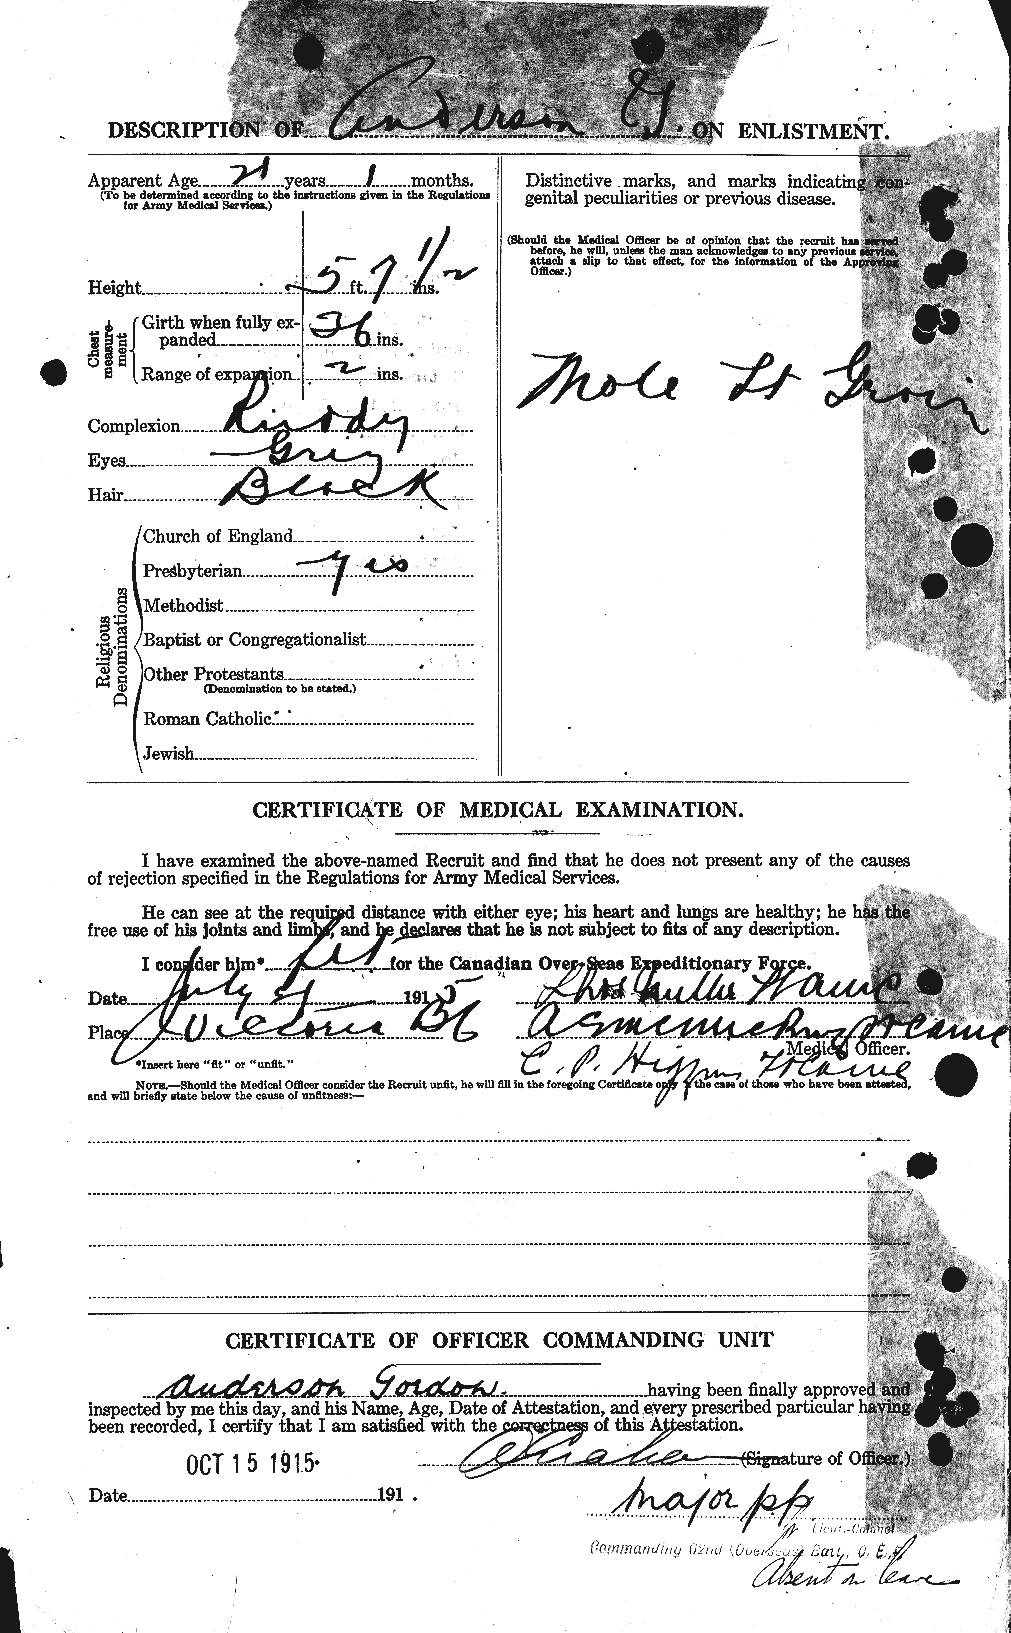 Personnel Records of the First World War - CEF 209668b